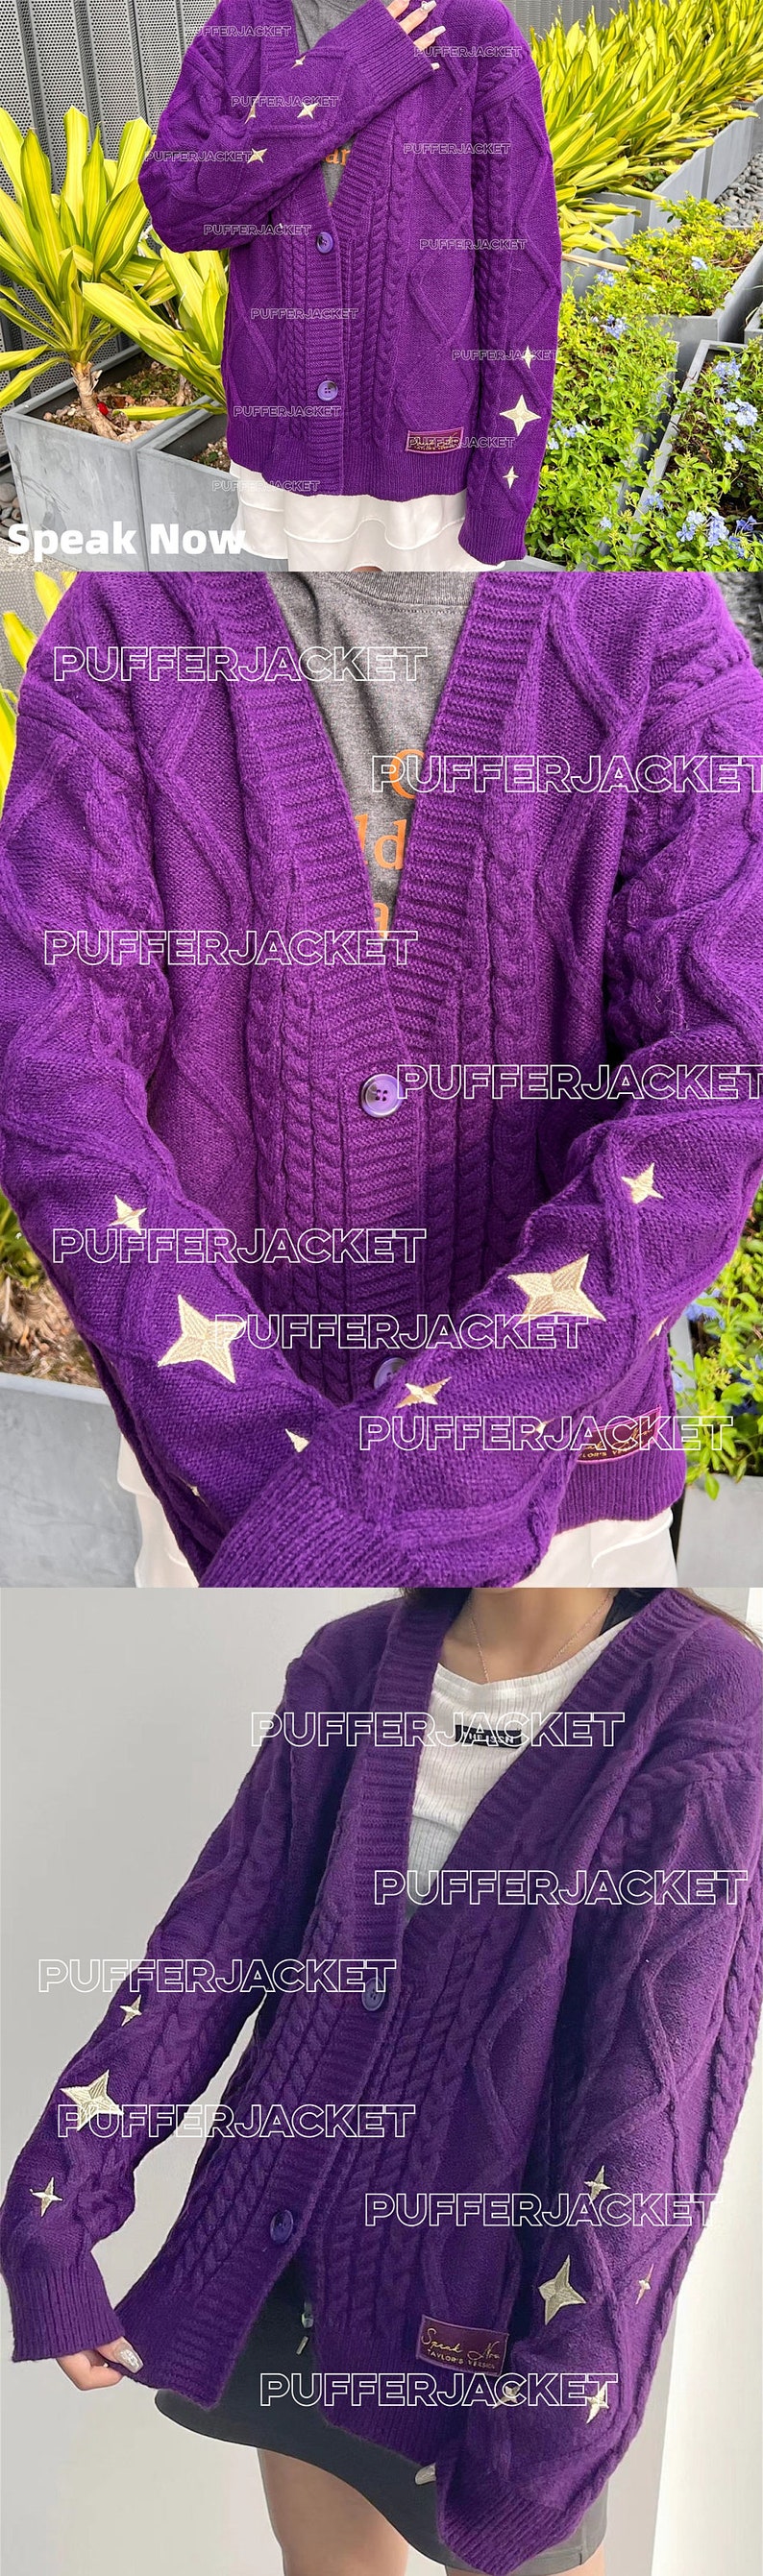 1989 blue folk cardigan/star embroidered cardigan/v-neck oversized cute hand-knitted holiday button sweater/gift for fans Speak Now